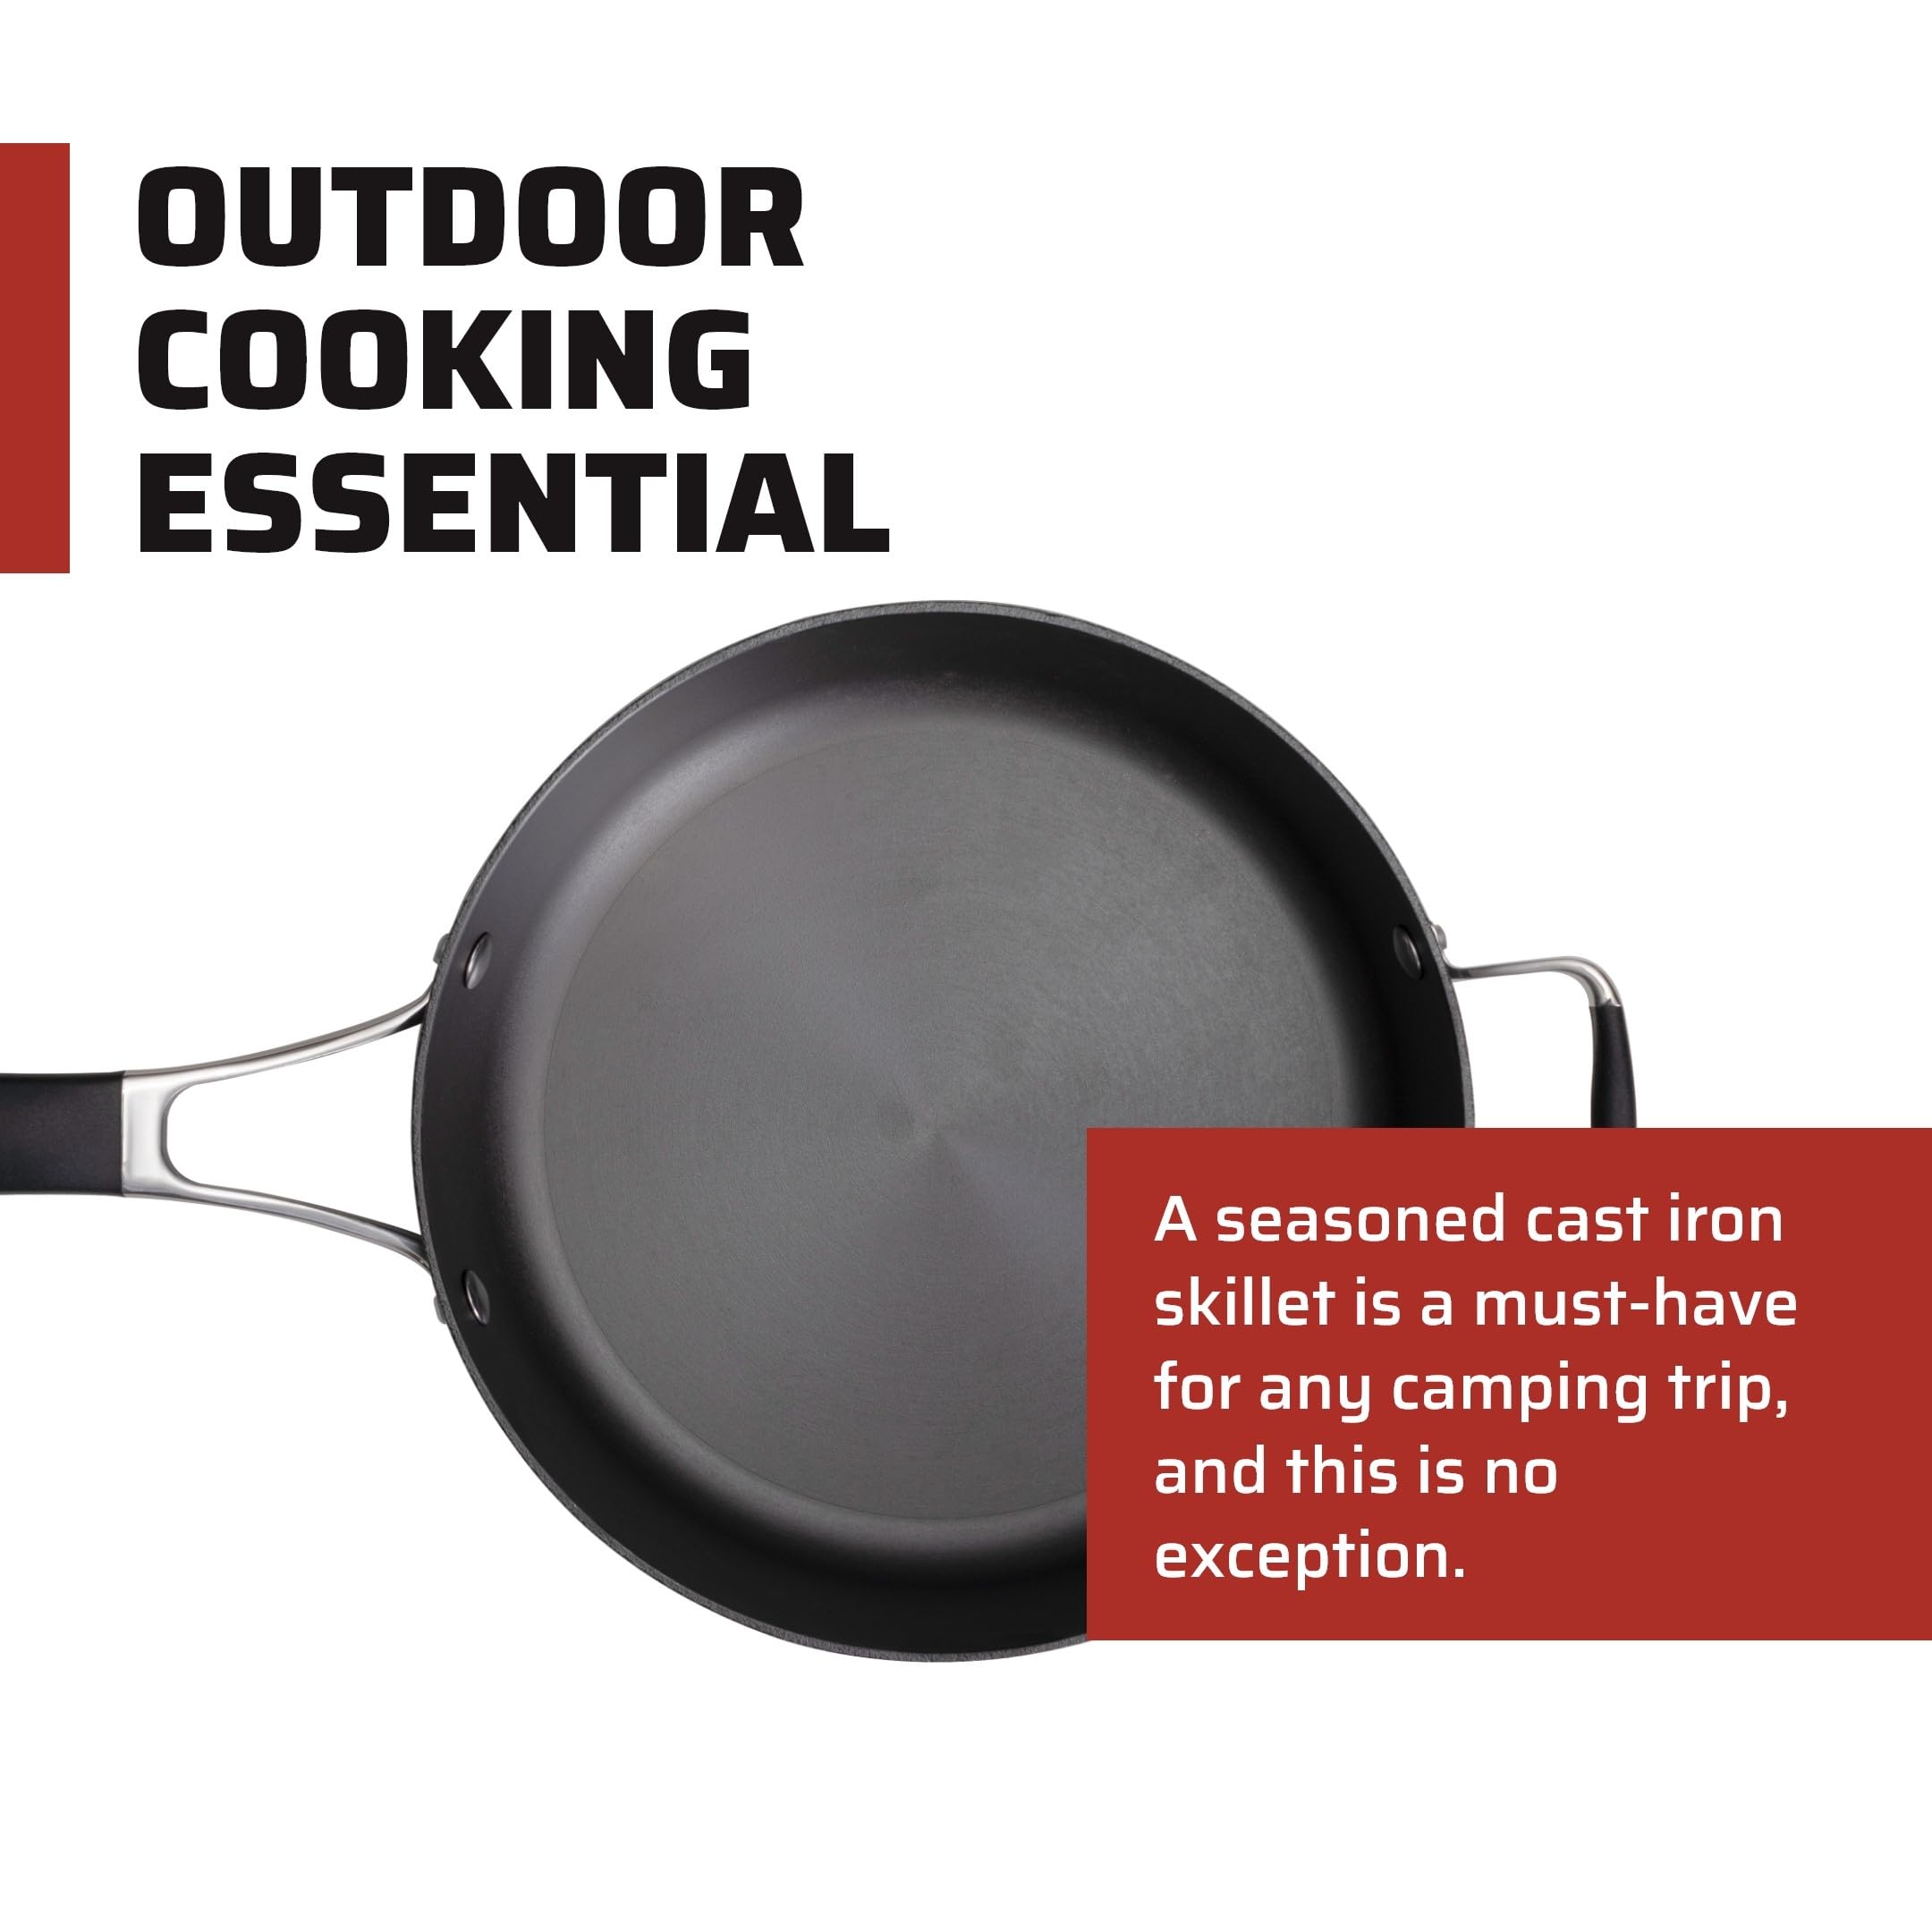 Camp Chef 10" Cast Iron Skillet, Oven Safe, No Nonstick Coating, Ideal for Camping Trips